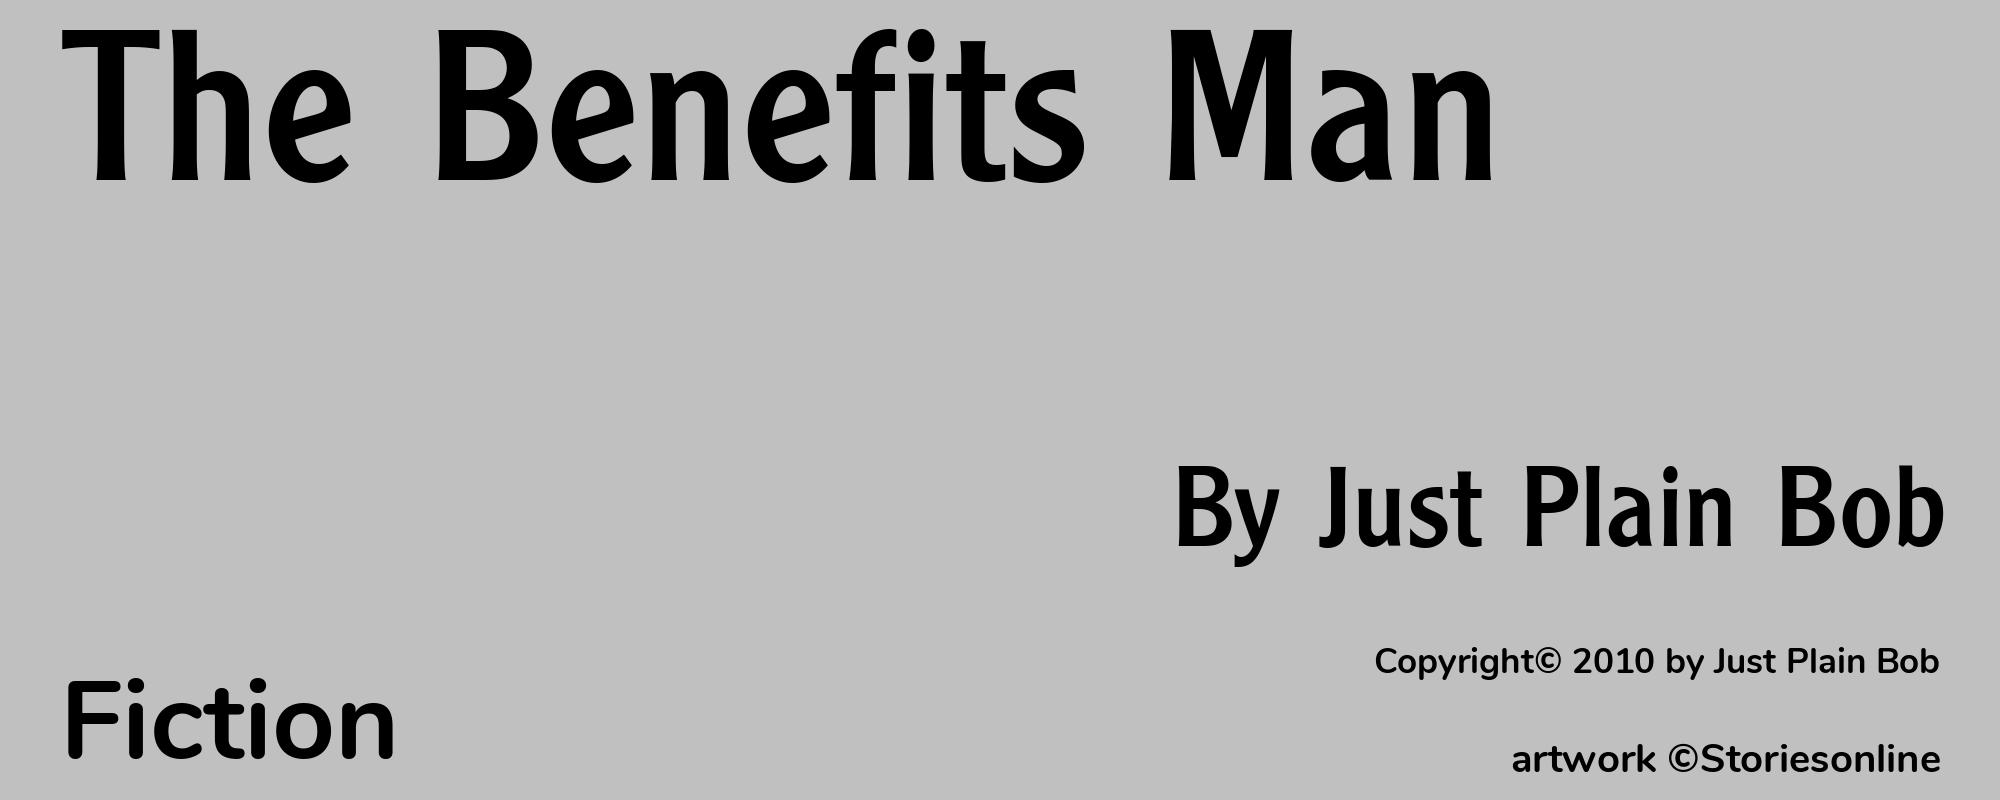 The Benefits Man - Cover